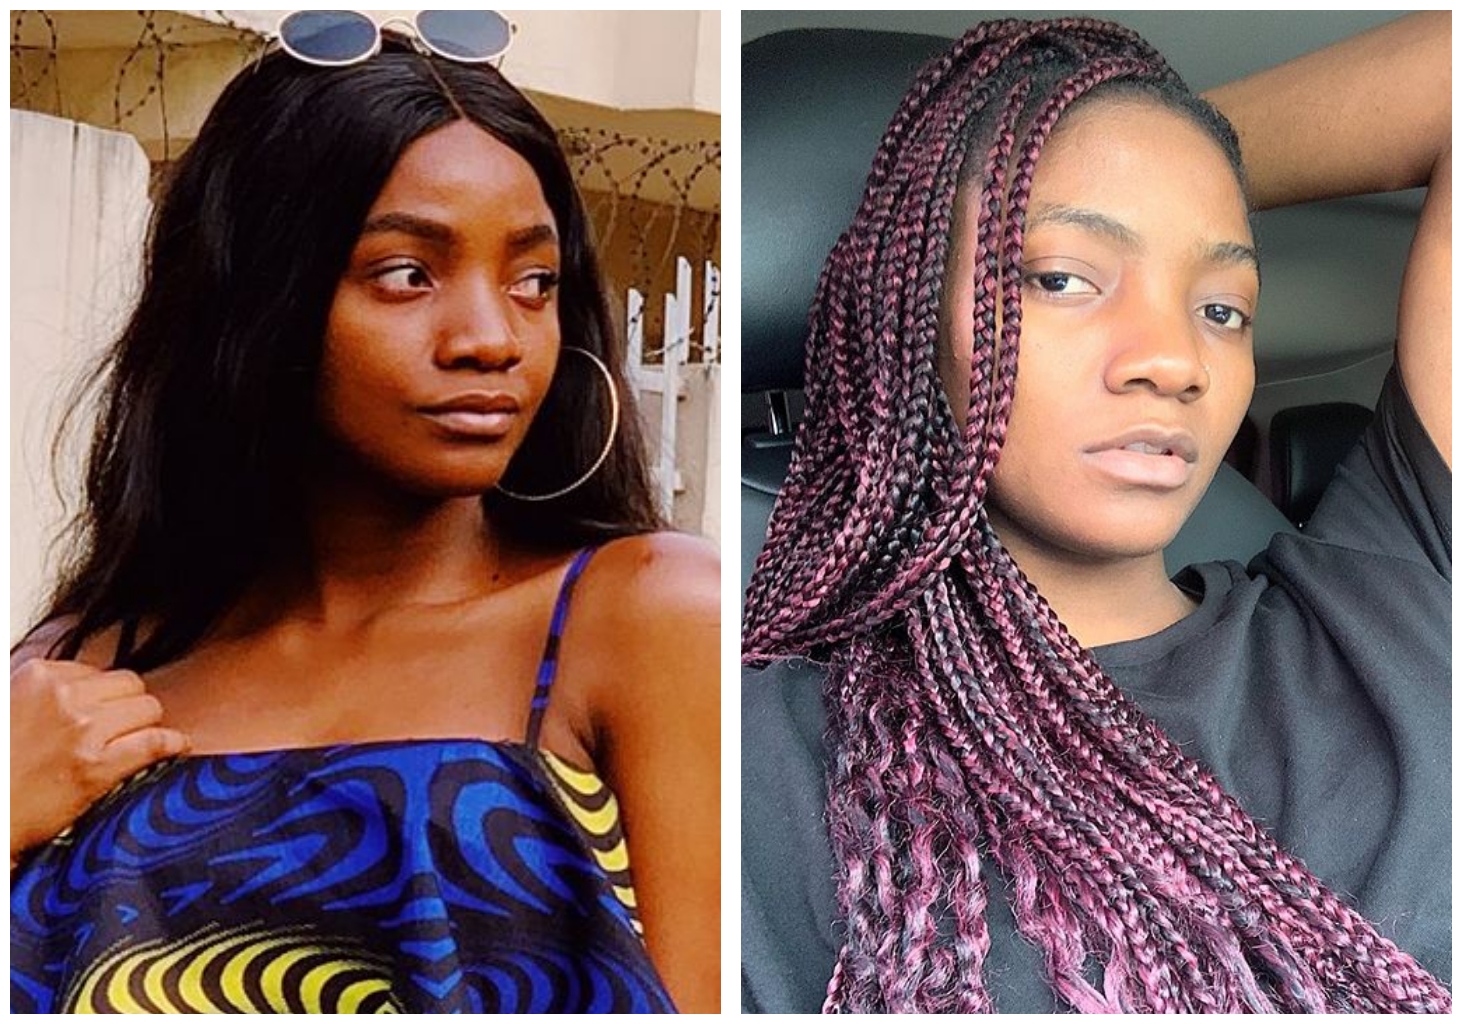 "Money is not everything, show your parents love and attention" – Simi